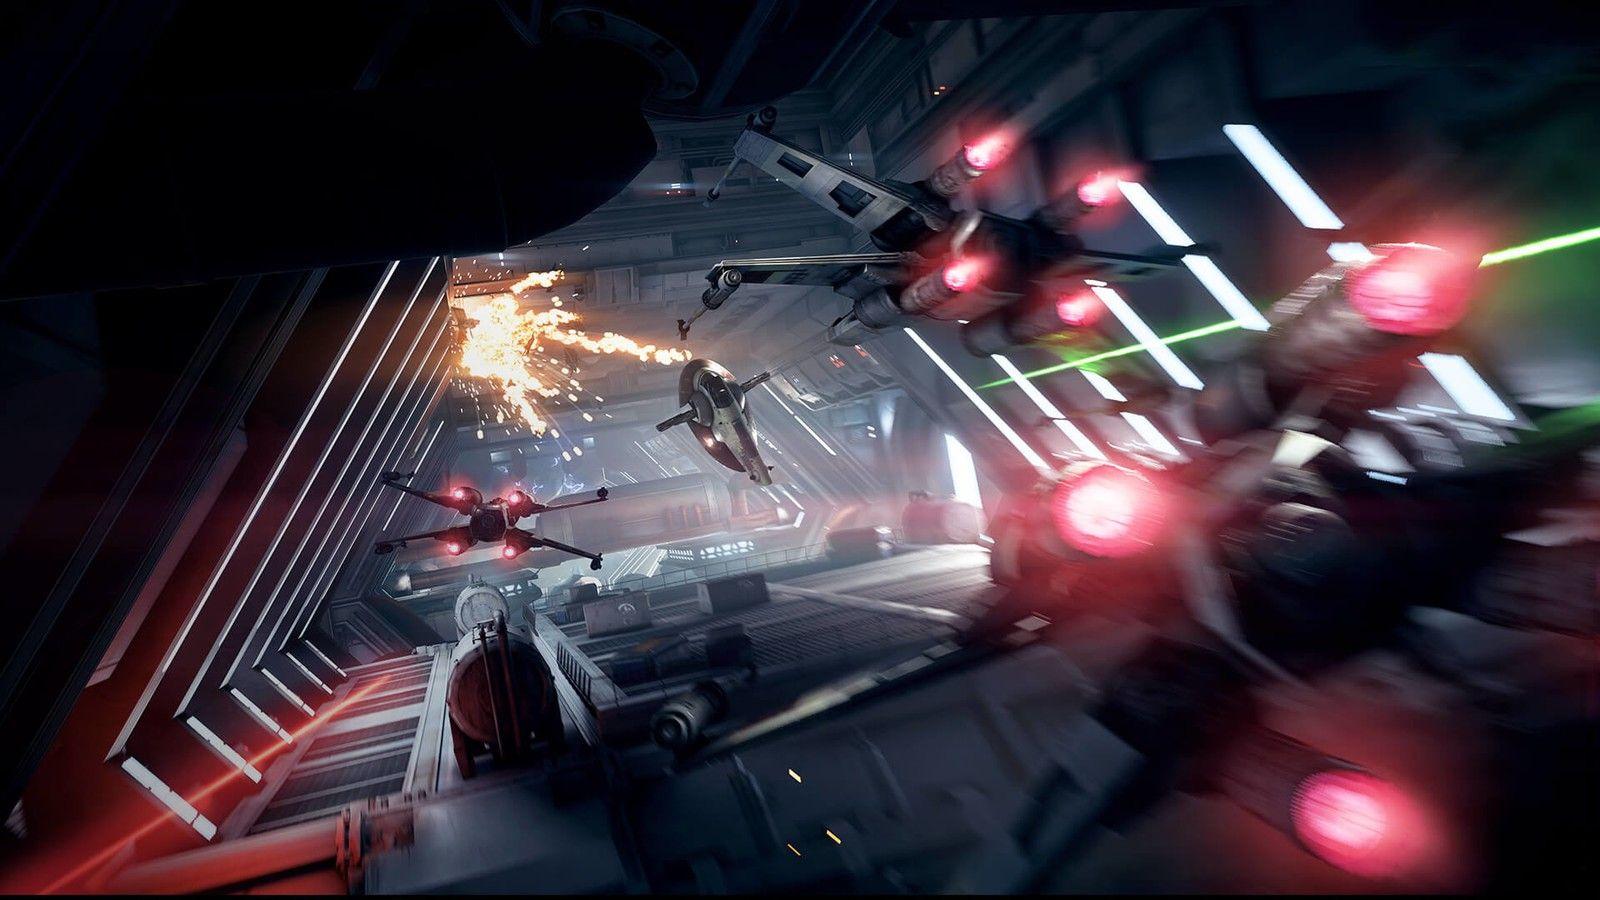 It appears that Star Wars Battlefront II will support 4K on Xbox One